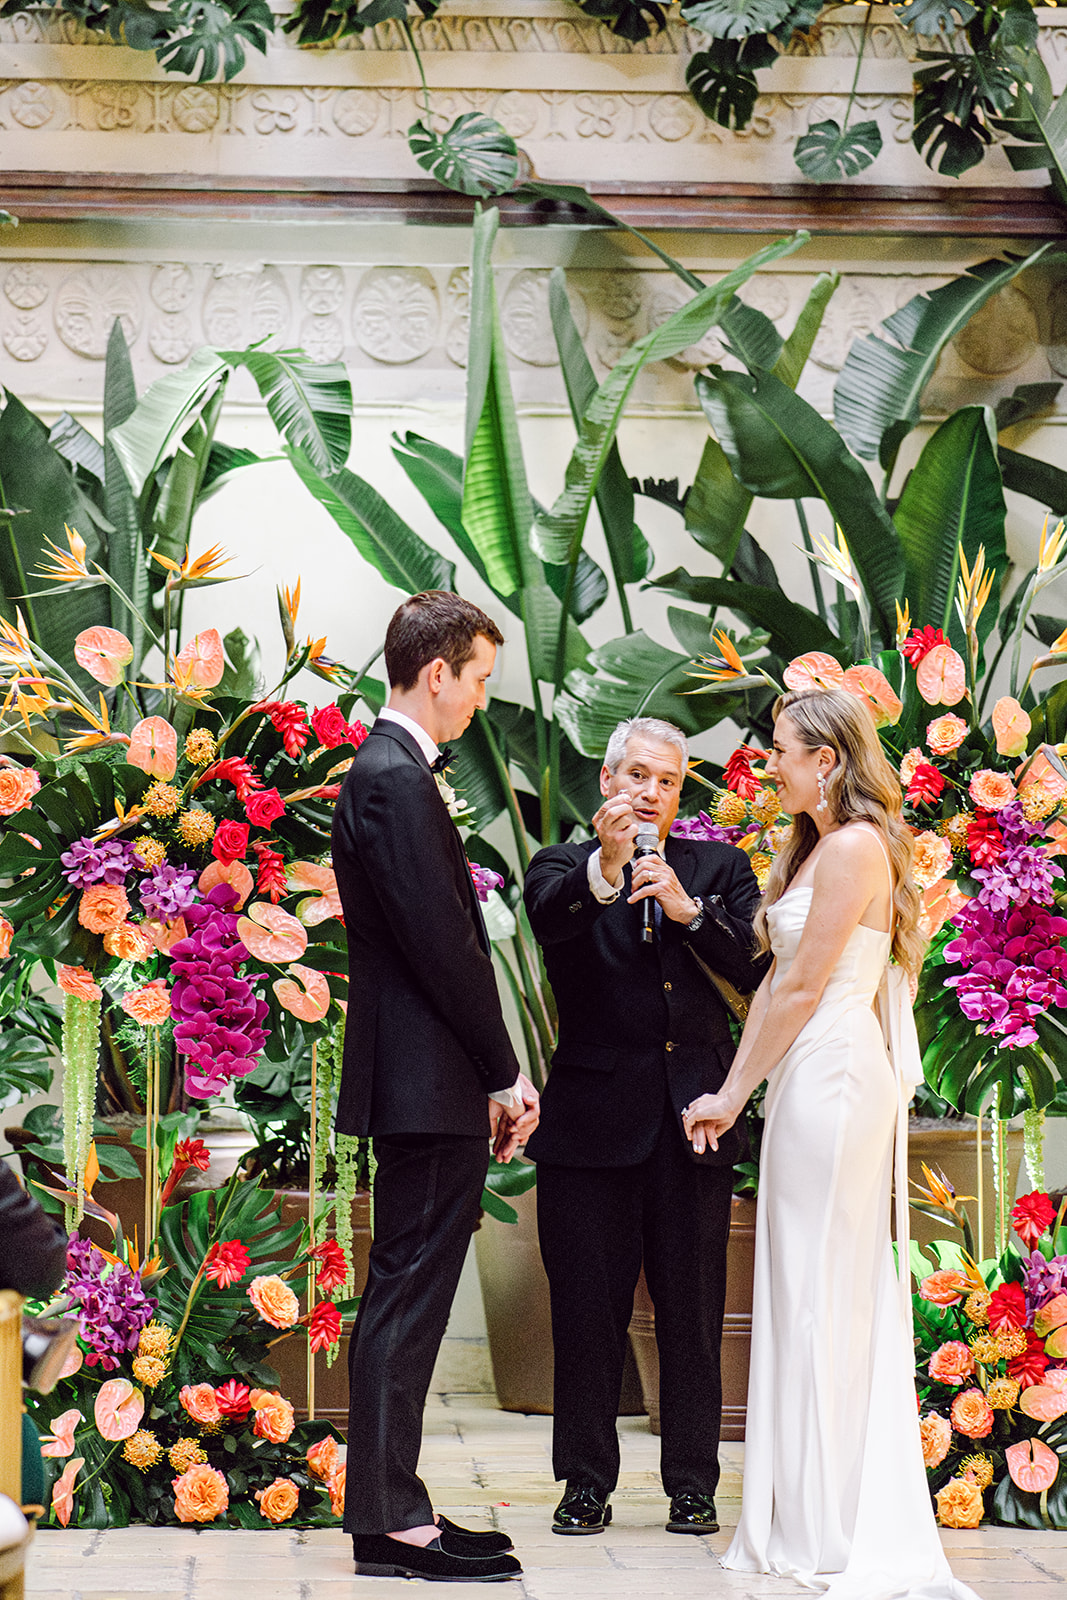 Officiant holds up rings at the floral altar during ceremony at Mayfair House Hotel & Garden in Miami on wedding day.